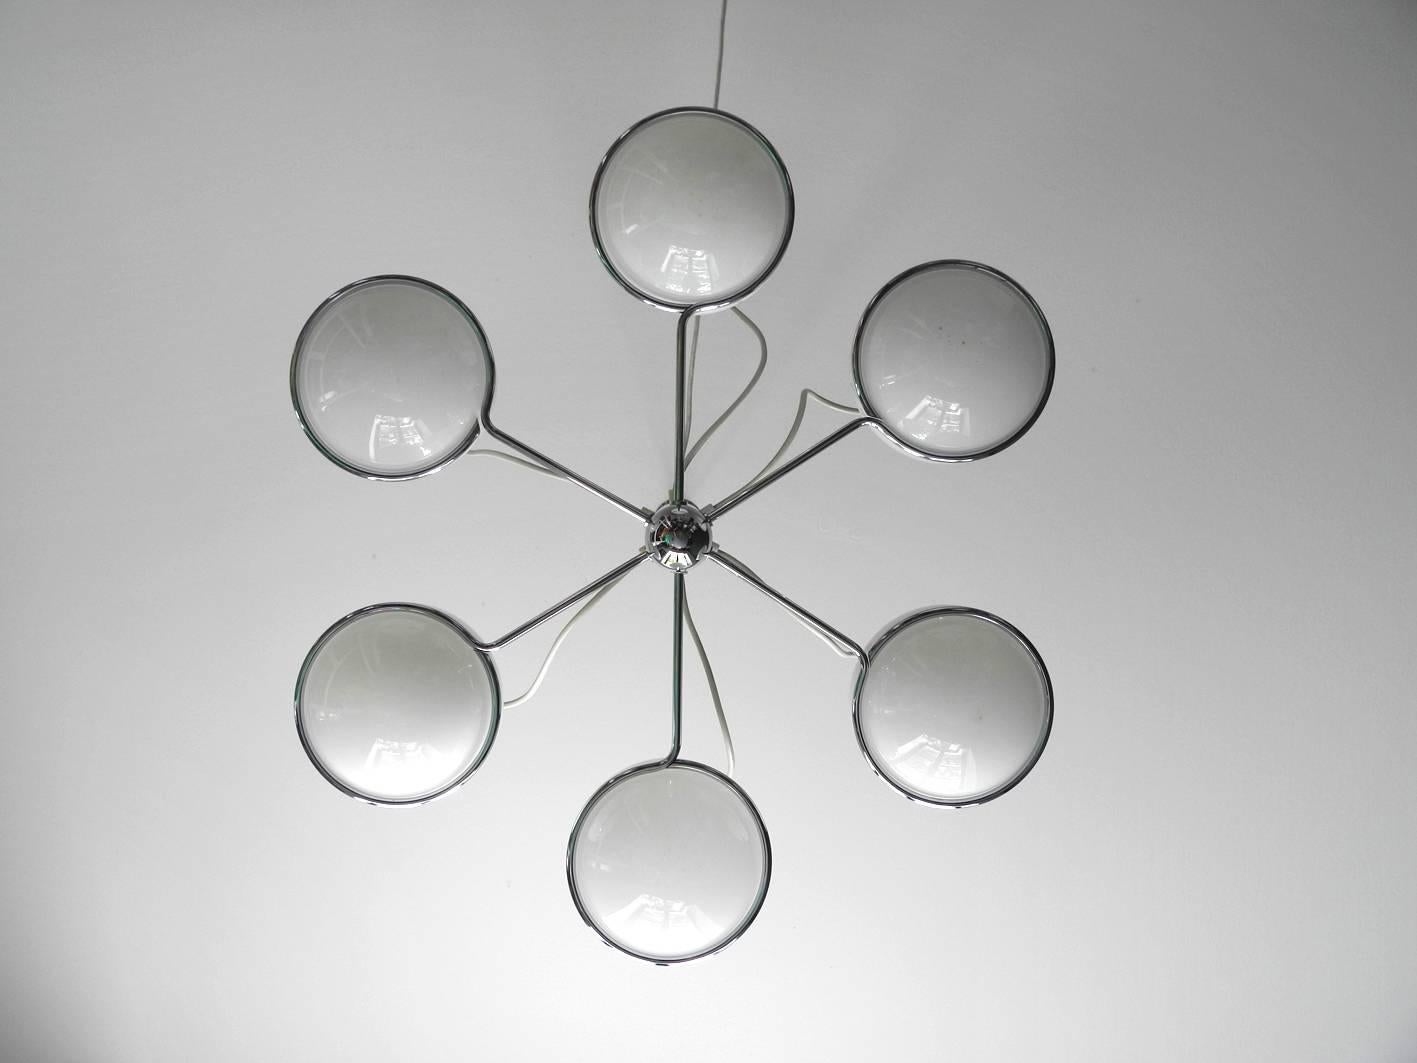 Metal Italian 1960s Pop Art Space Age Chrome Ceiling Lamp with Six Glass Balls